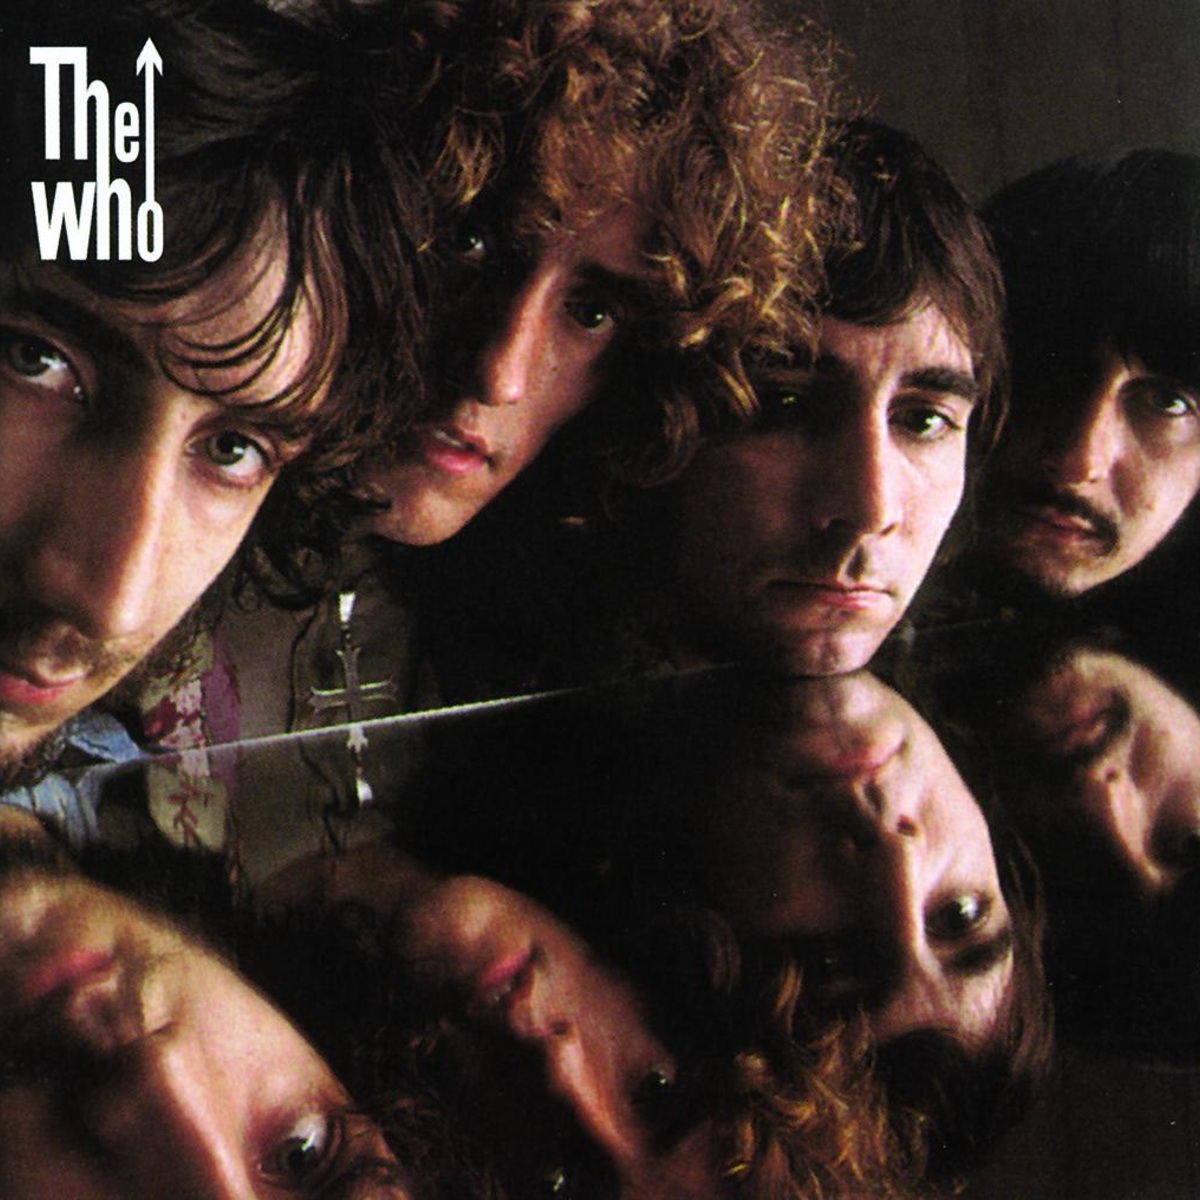 Who can it be now mp3. The who Ultimate collection. The who фотоальбомов. The who обложки альбомов. The who the Ultimate collection 2002.